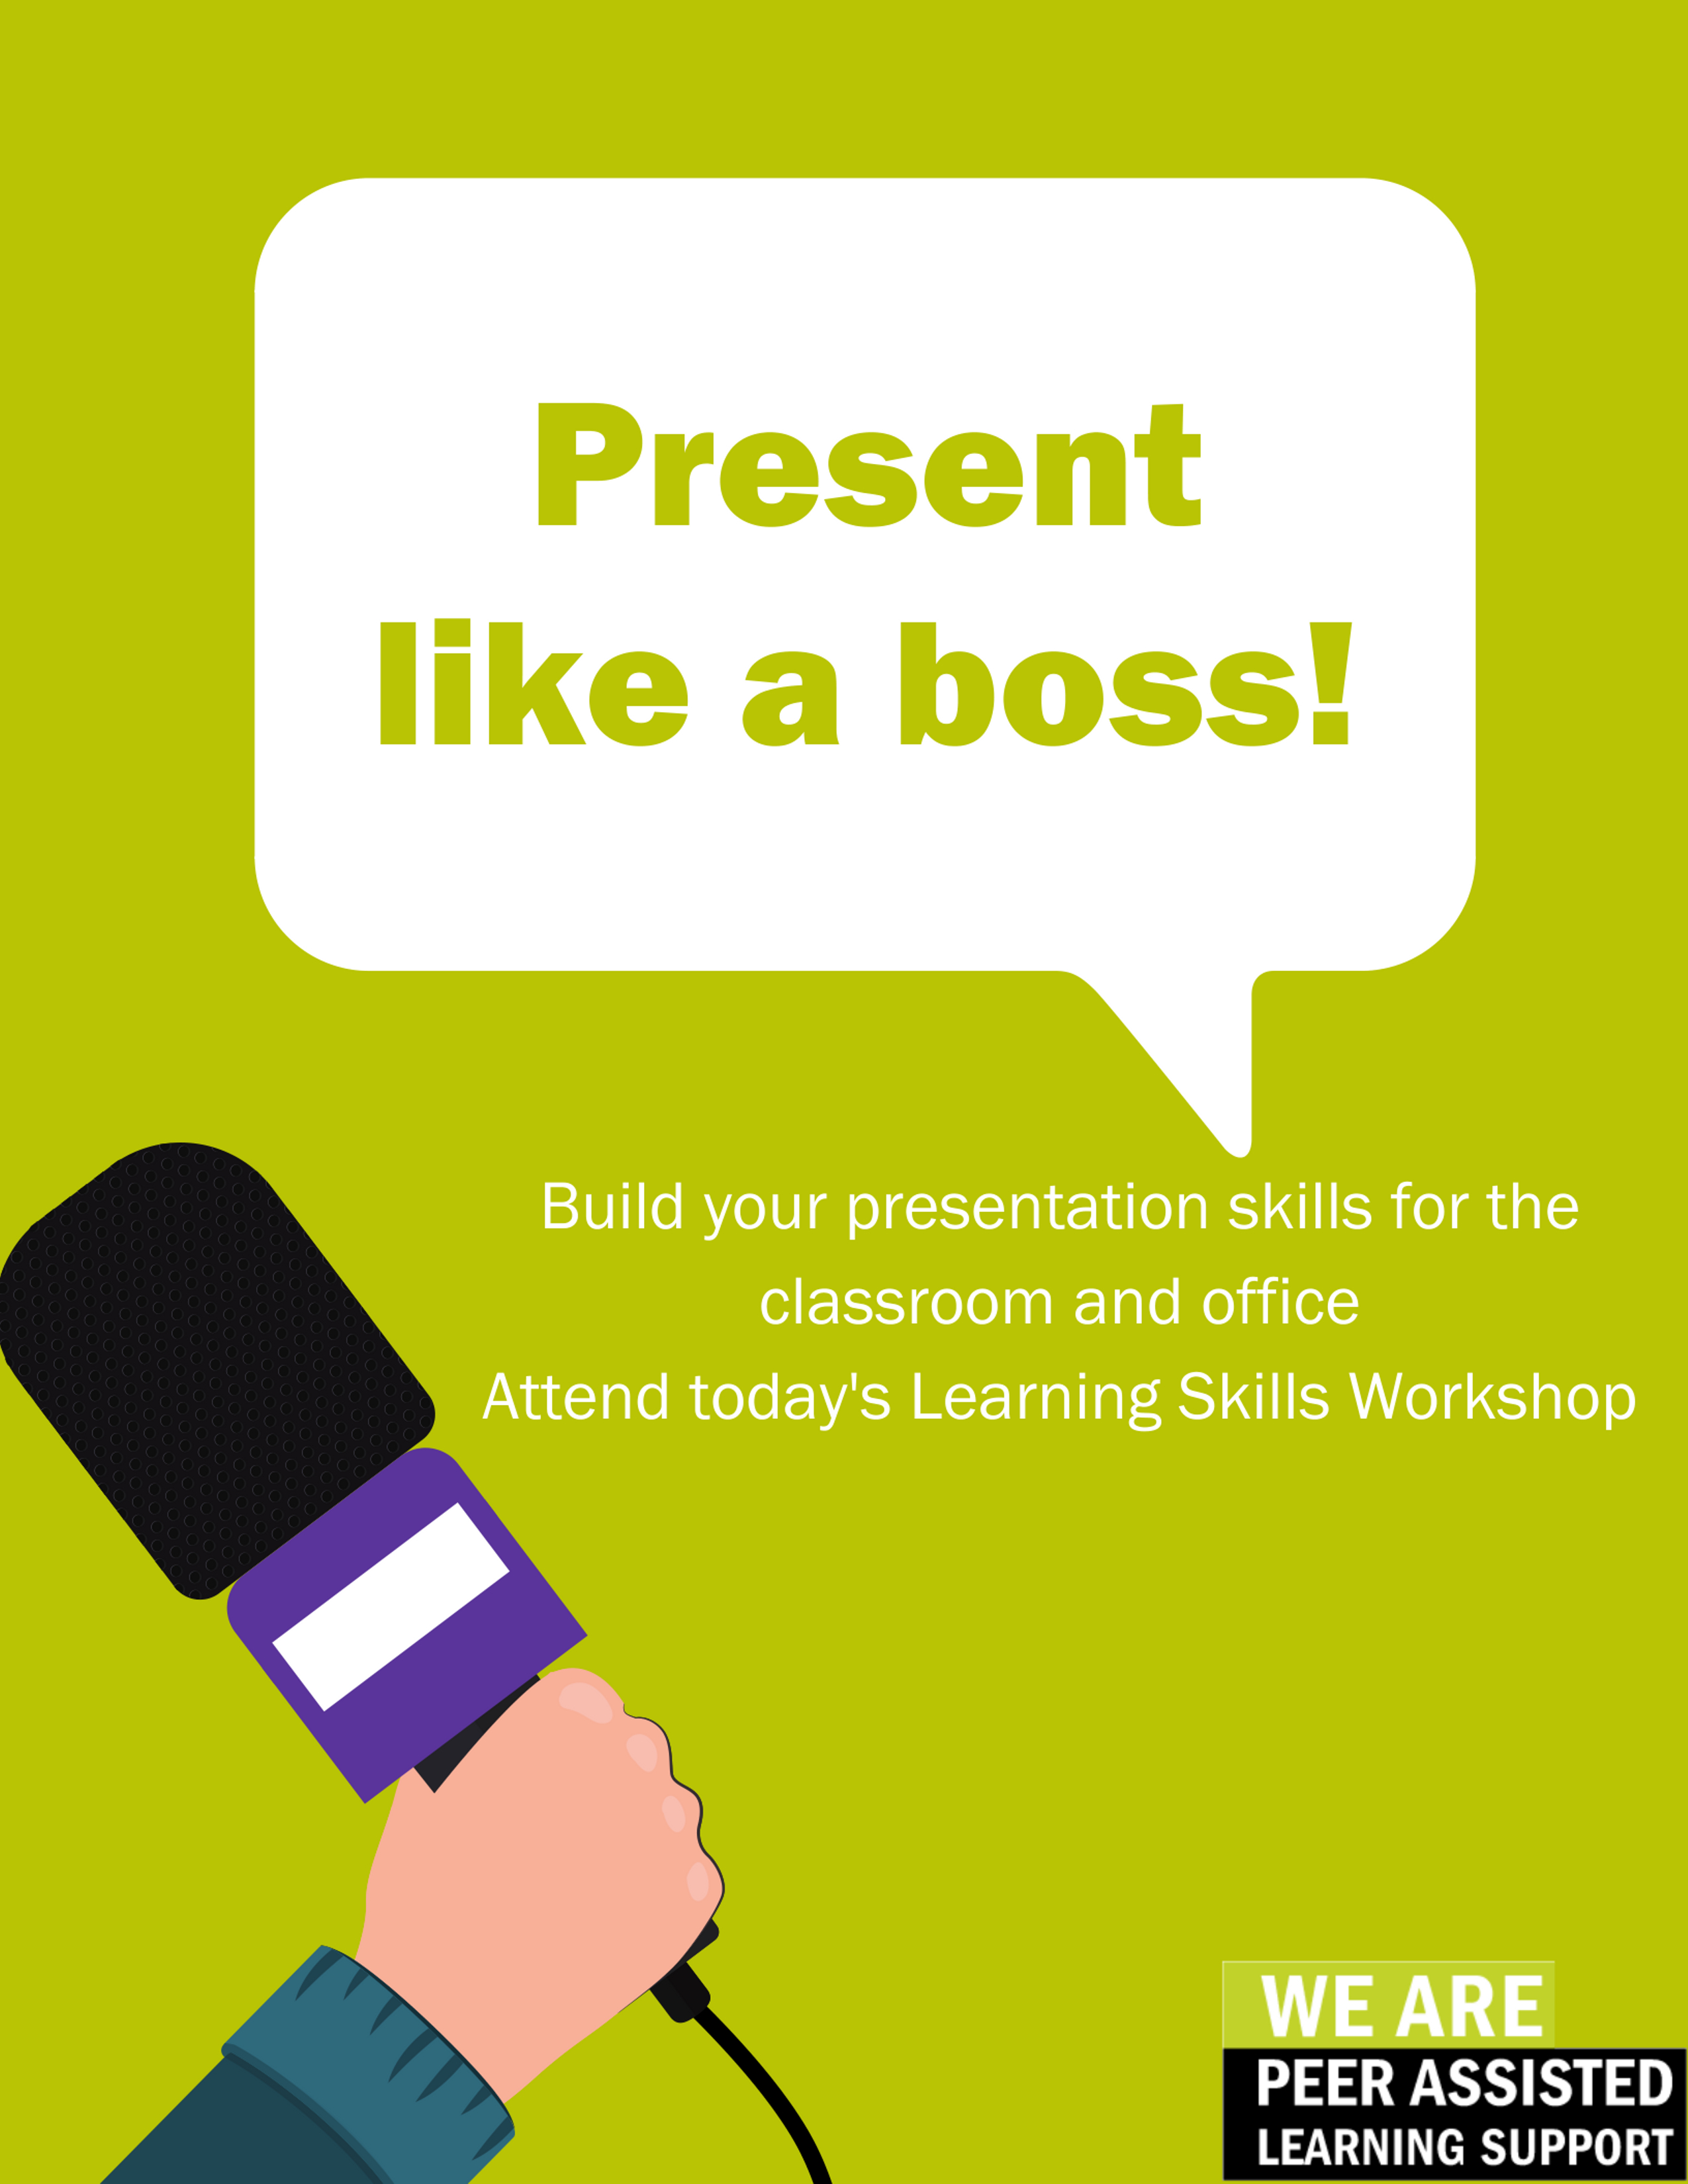 Learn how to present like a boss and build on your presentation skills.